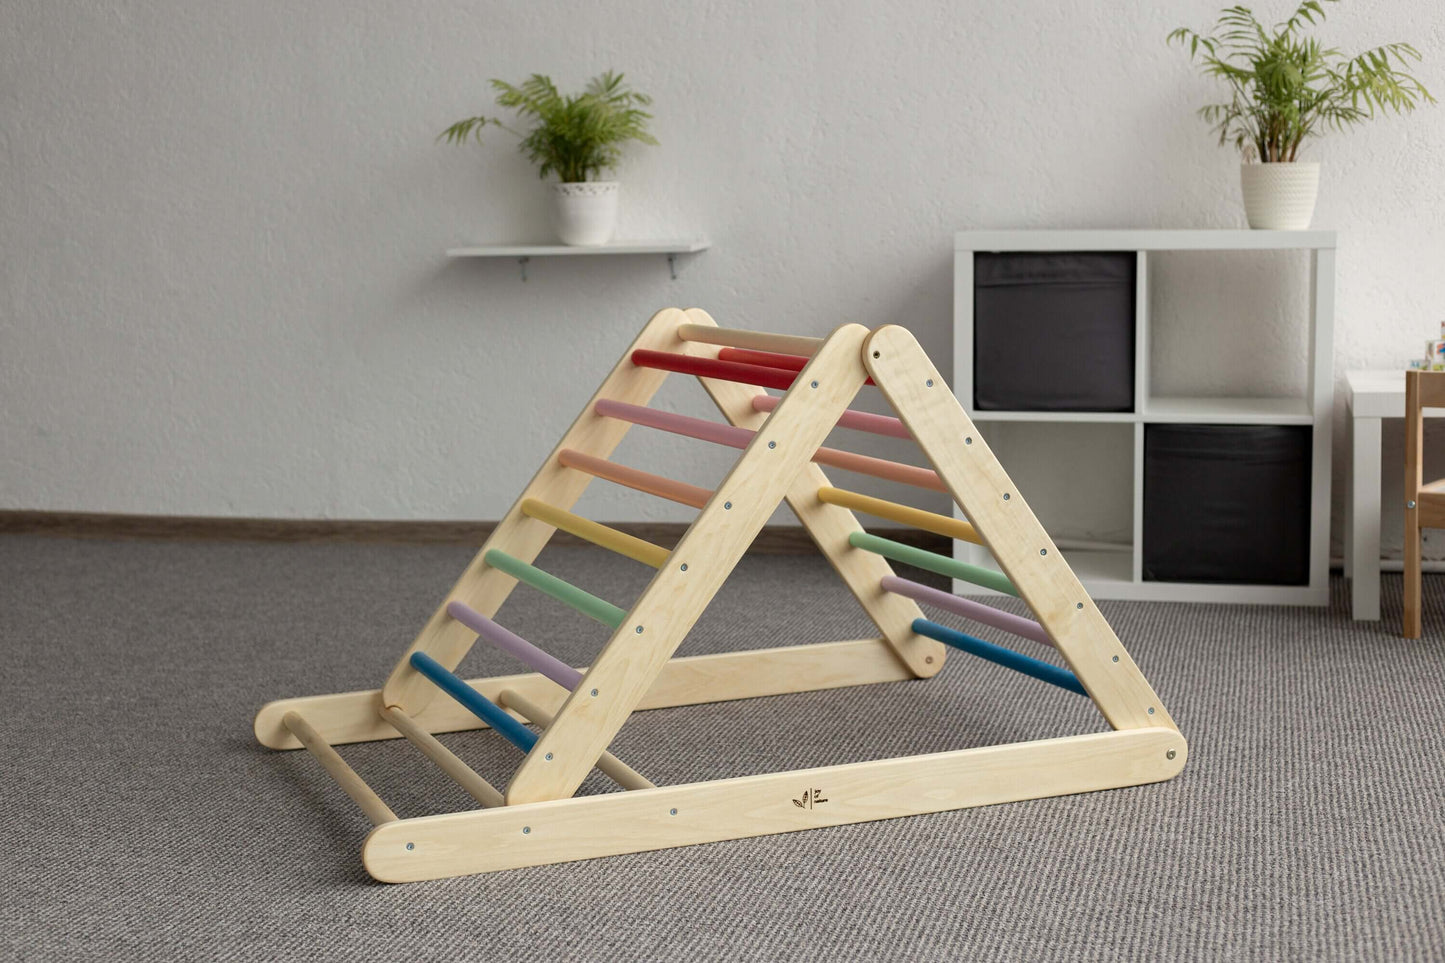 Adjustable climbing triangle for children, various colors